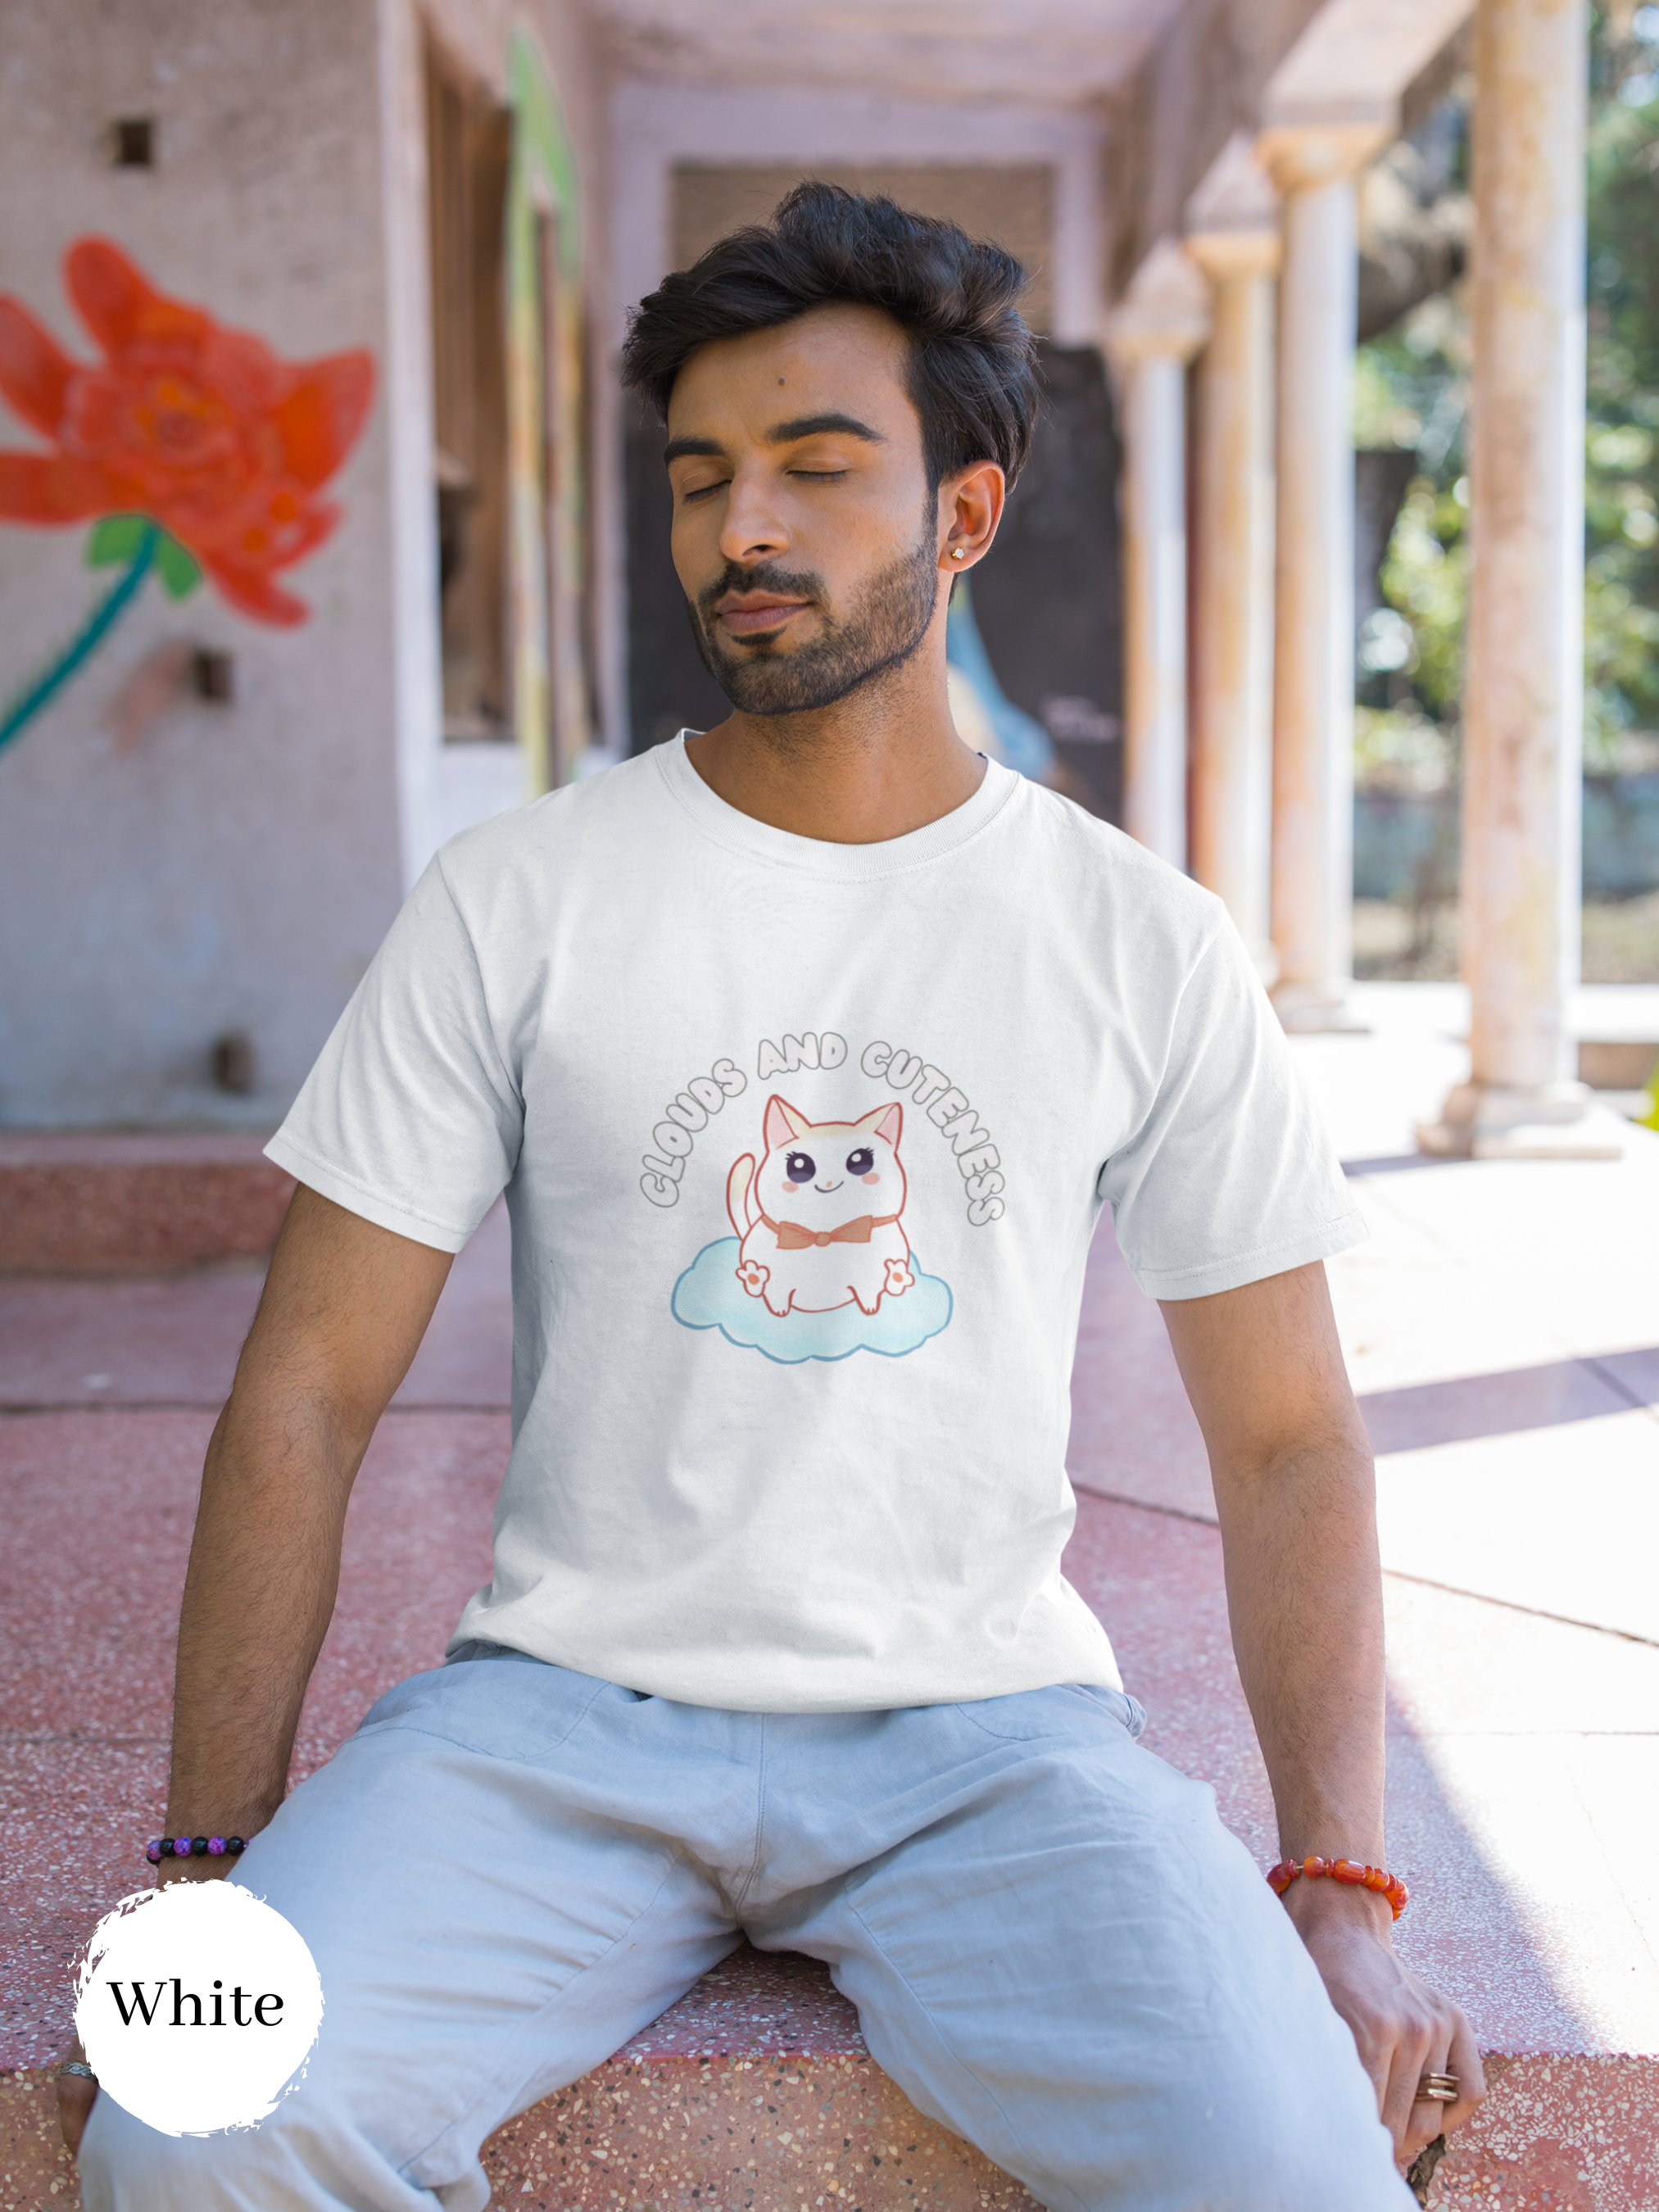 Cat T-shirt: Clouds and Cuteness - Japanese-Inspired Cat Art Shirt for Cat Lovers